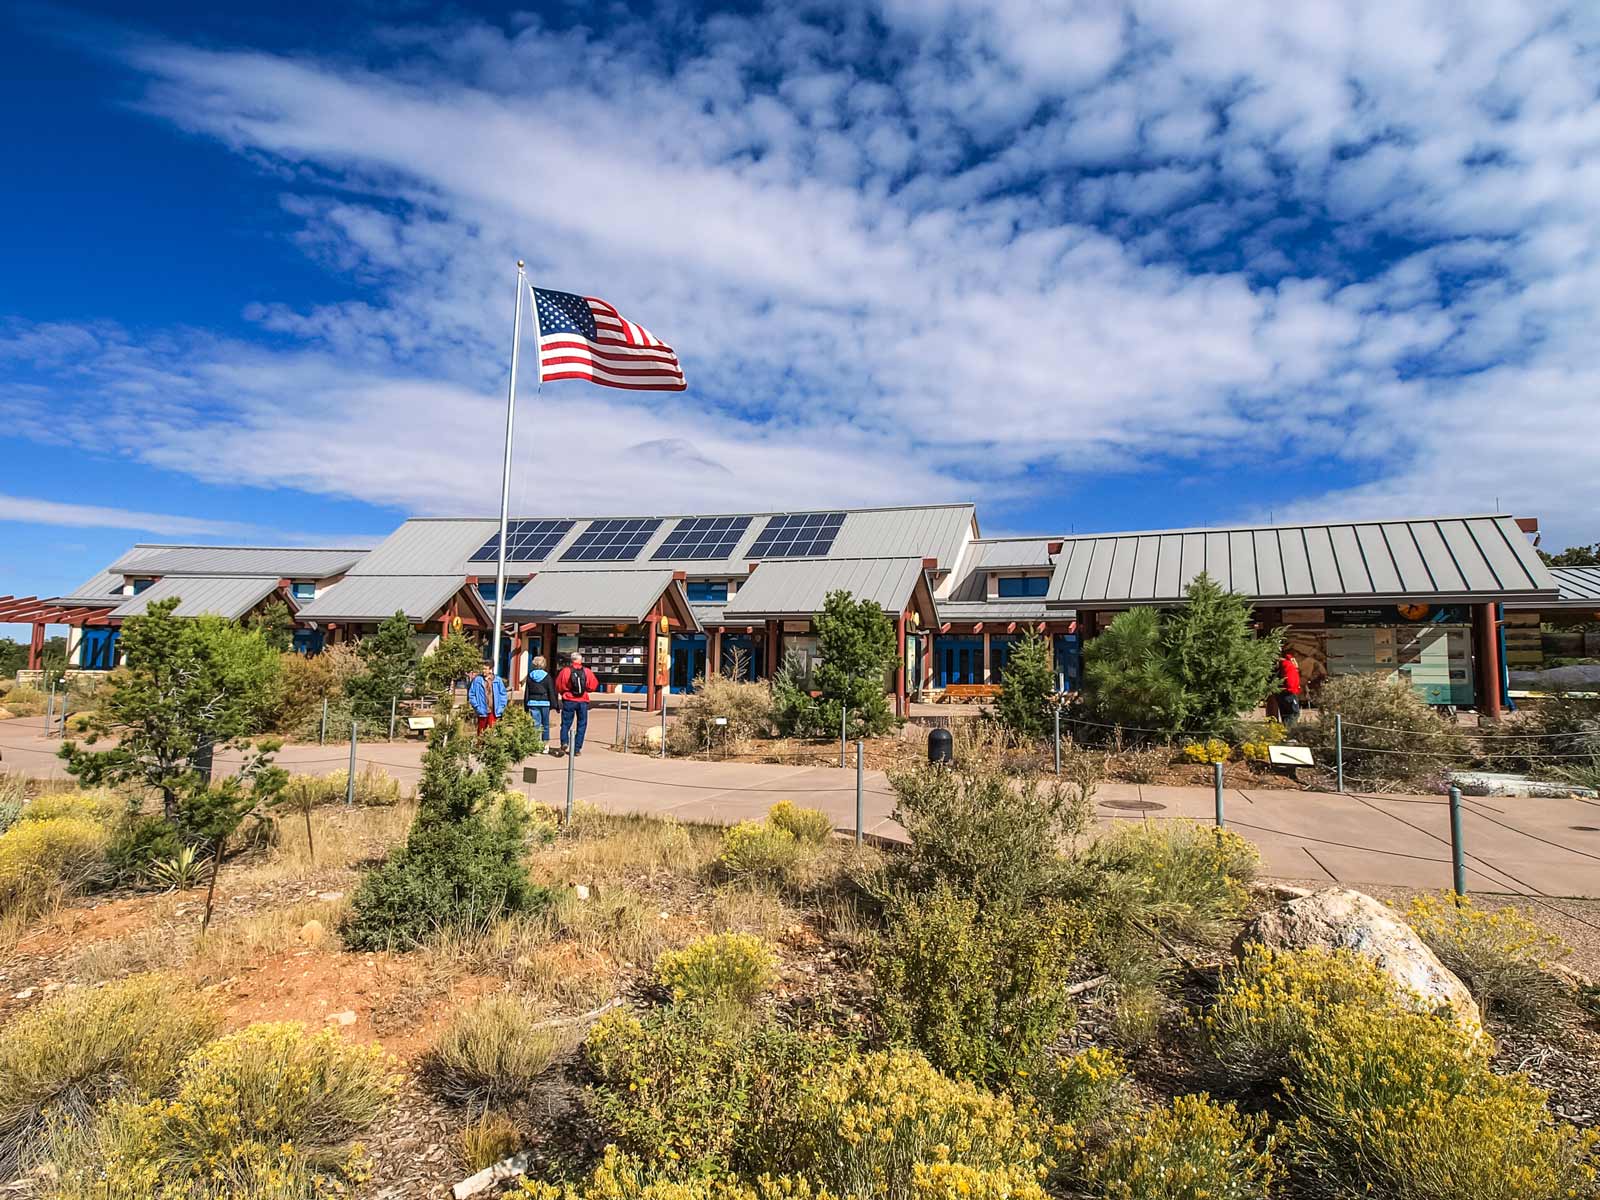 Best Things to do at the Grand Canyon Visitors Center